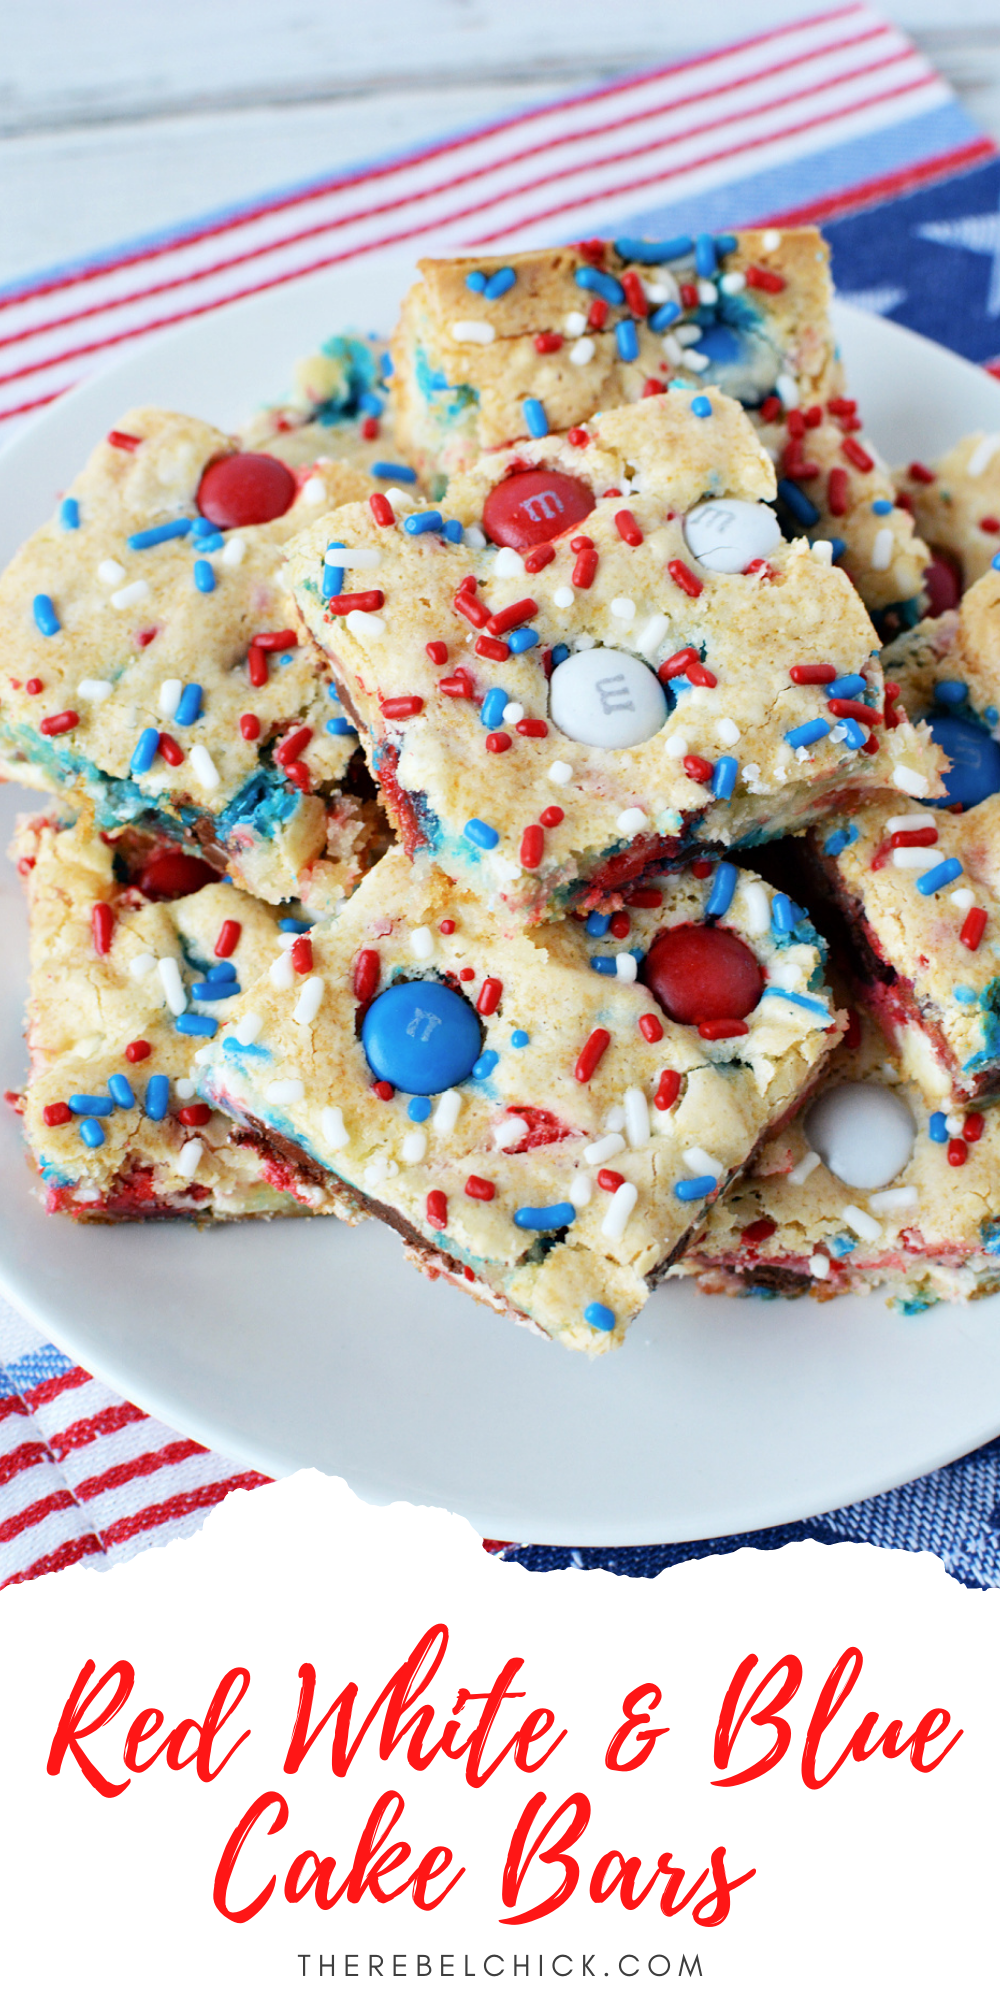 Red White and Blue Cake Bars Recipe